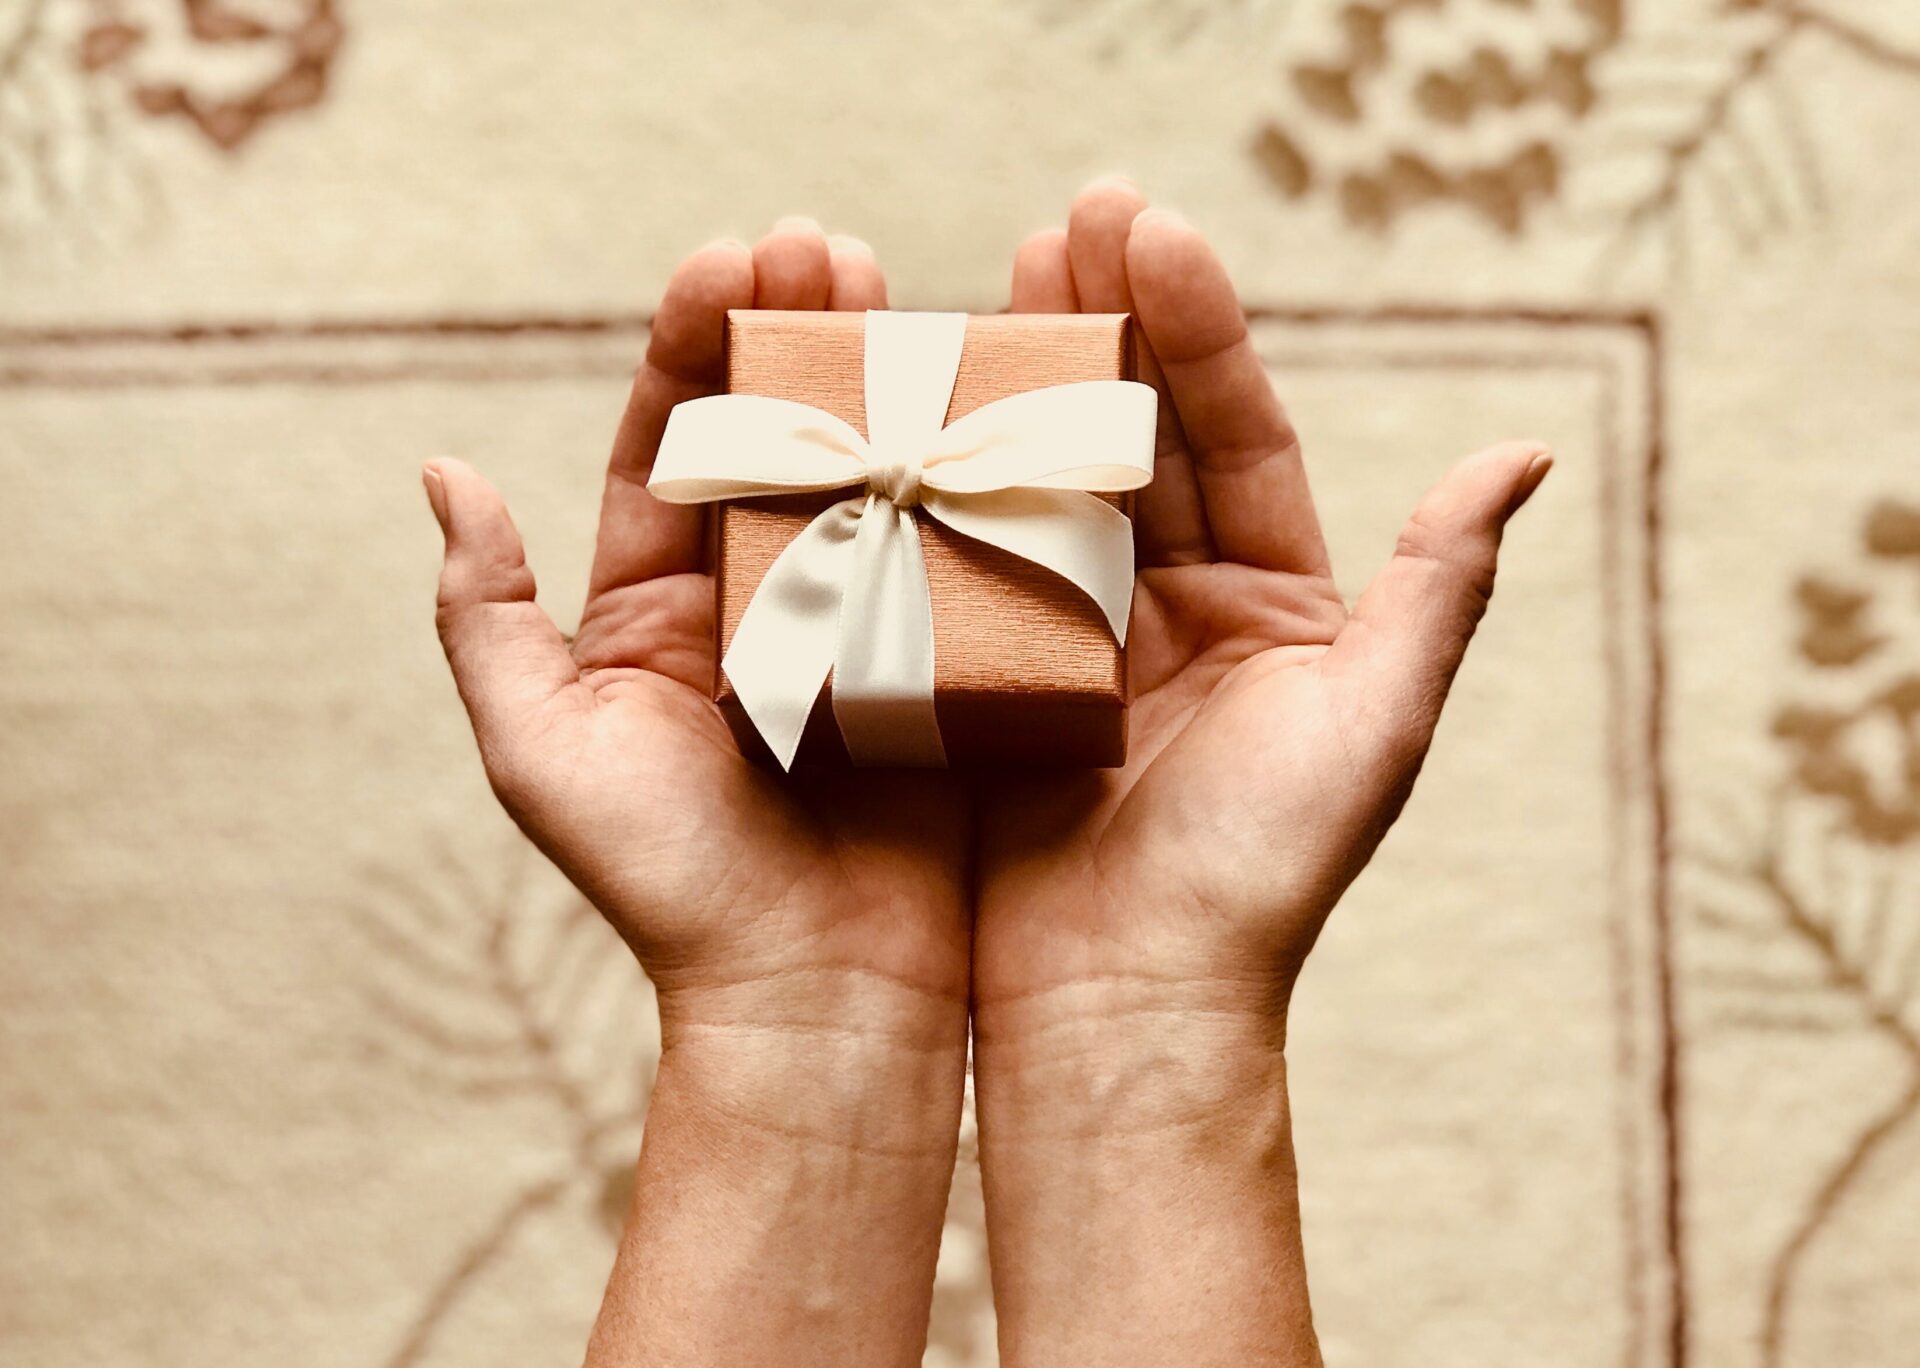 hand holding small gift